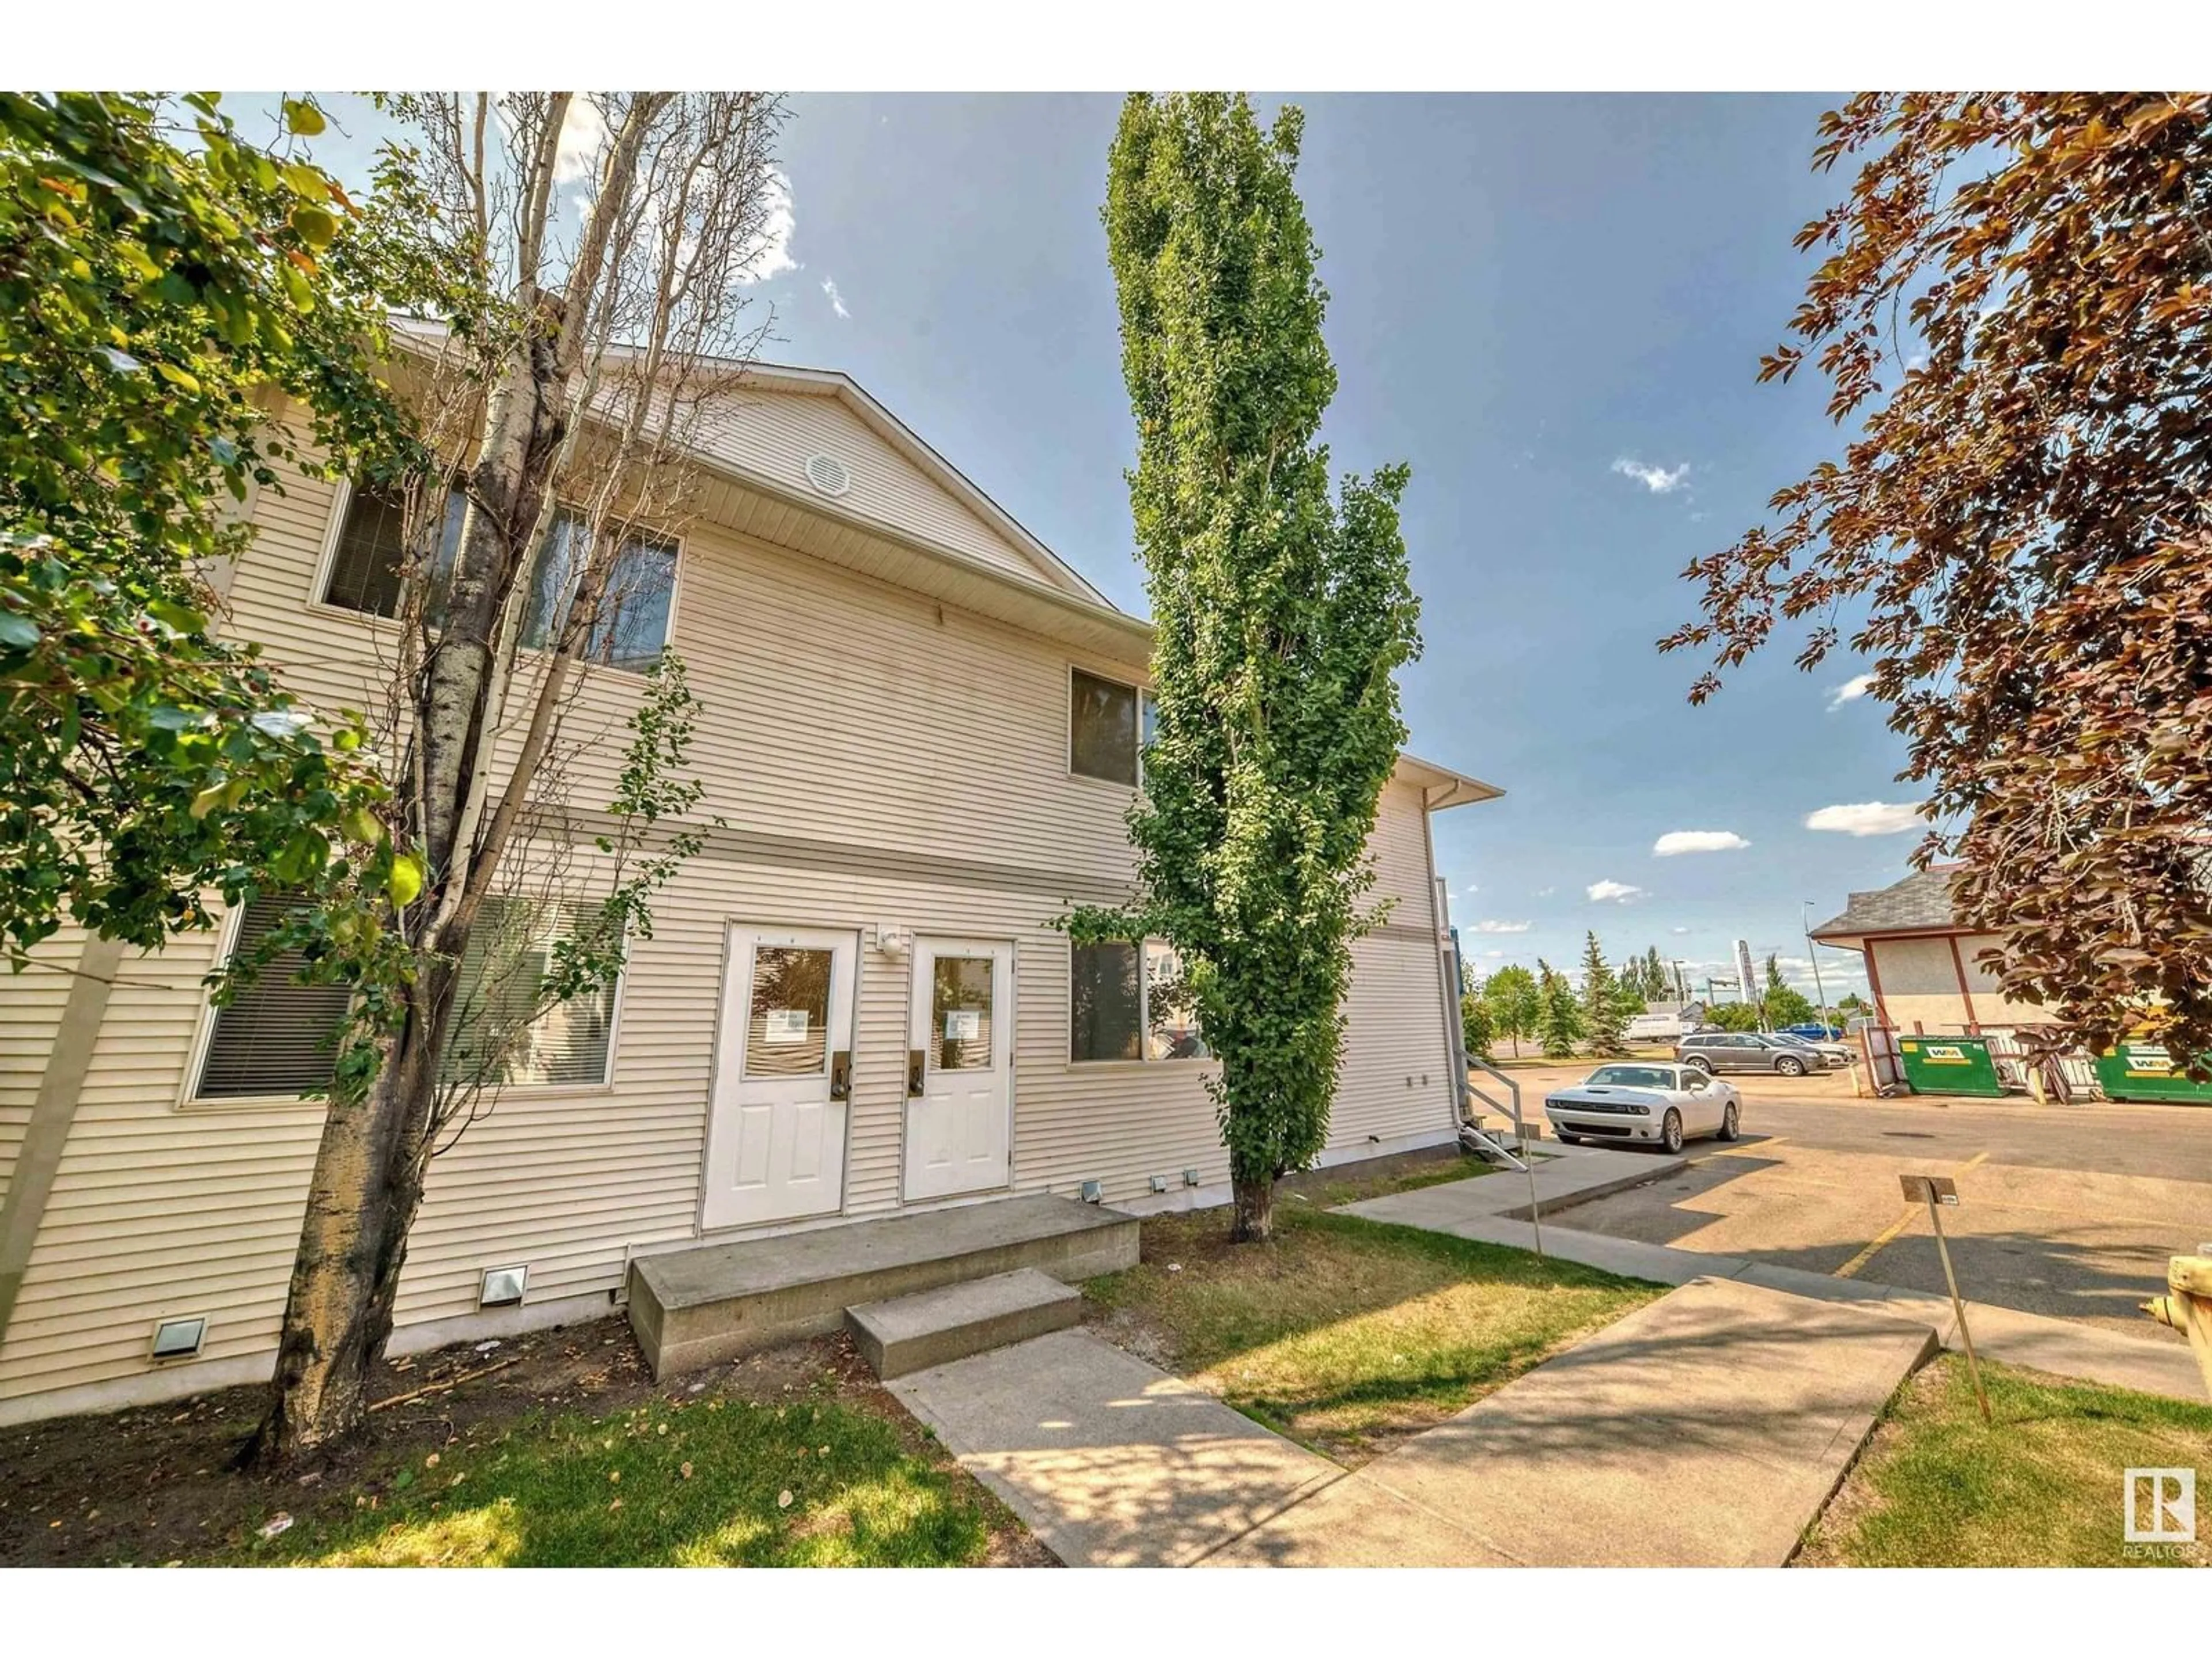 A pic from exterior of the house or condo for #107 620 KING ST, Spruce Grove Alberta T7X4K1